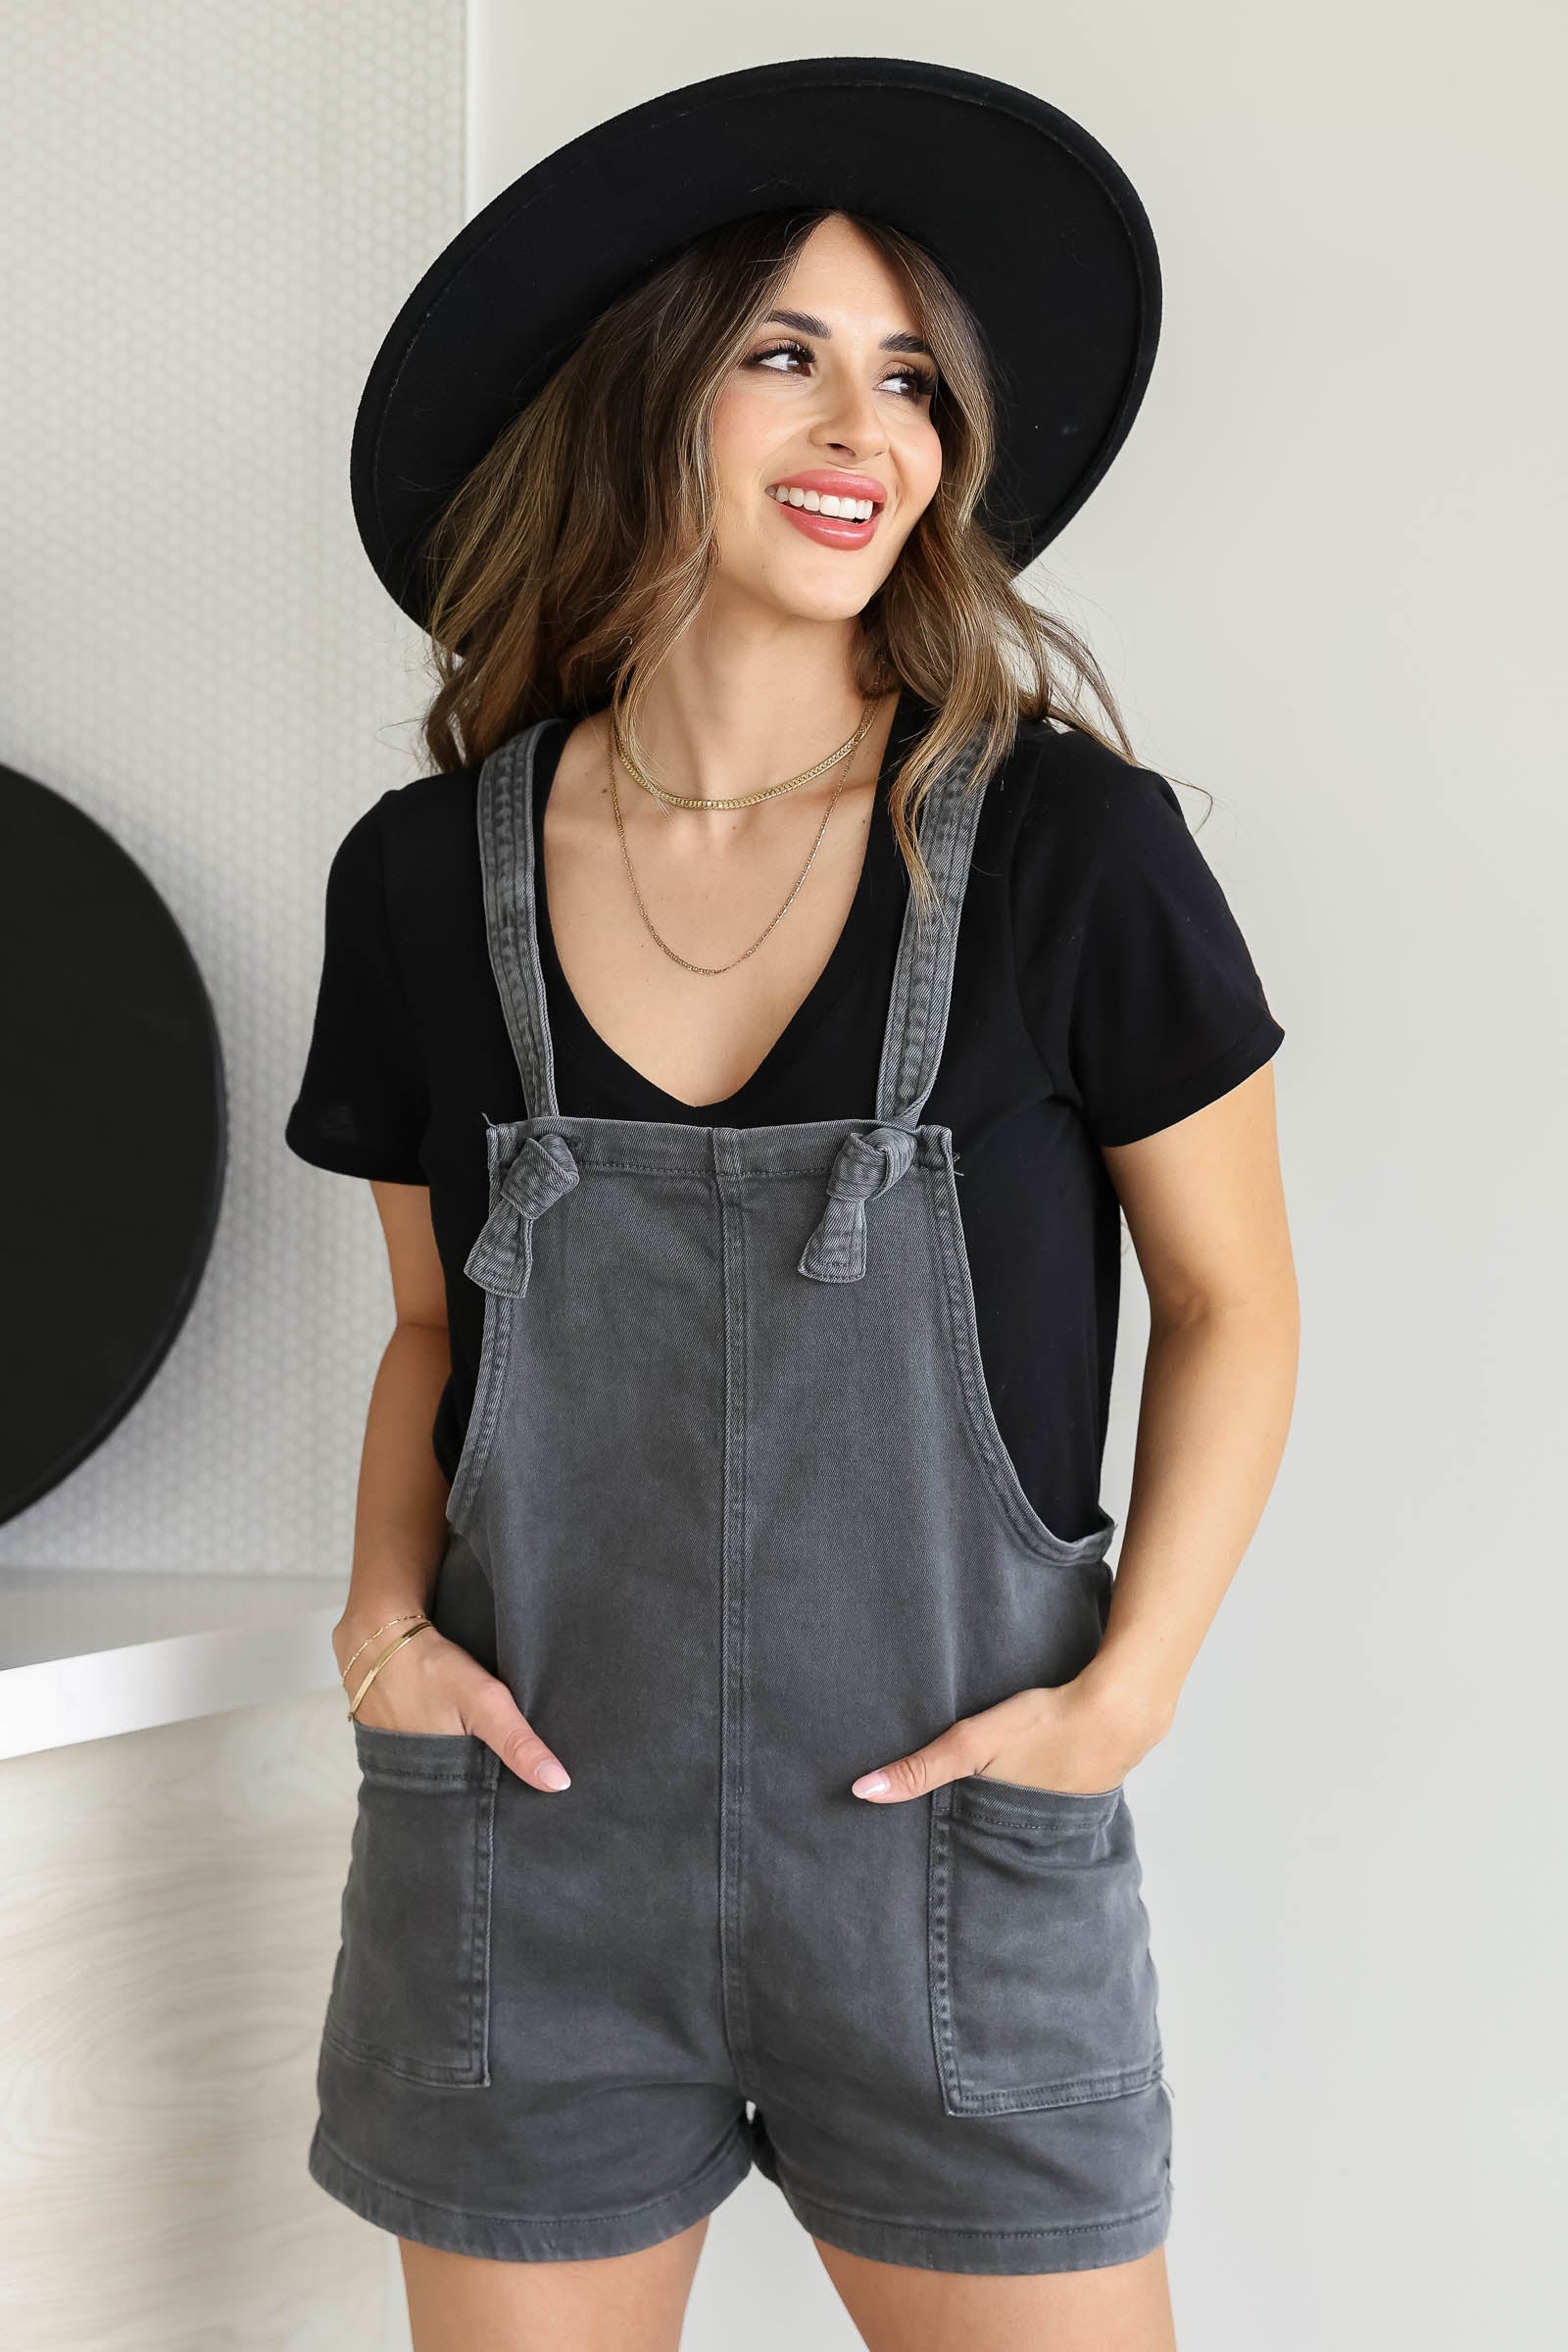 Really Doing It Short Overalls - Ash Black, Closet Candy, 1